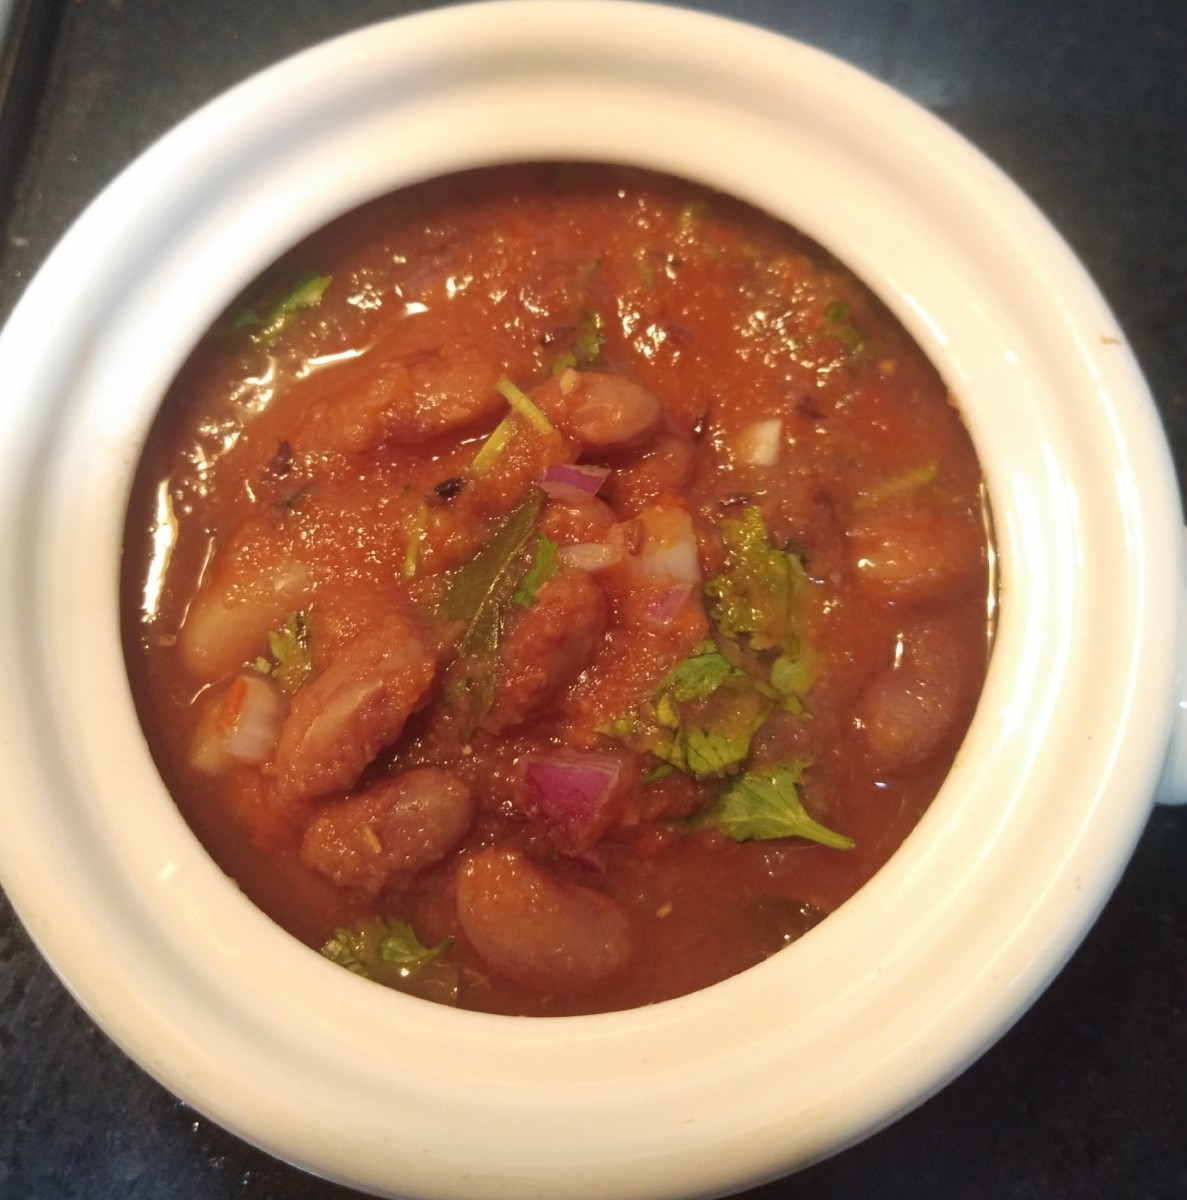 Rajma curry is a popular North Indian dish